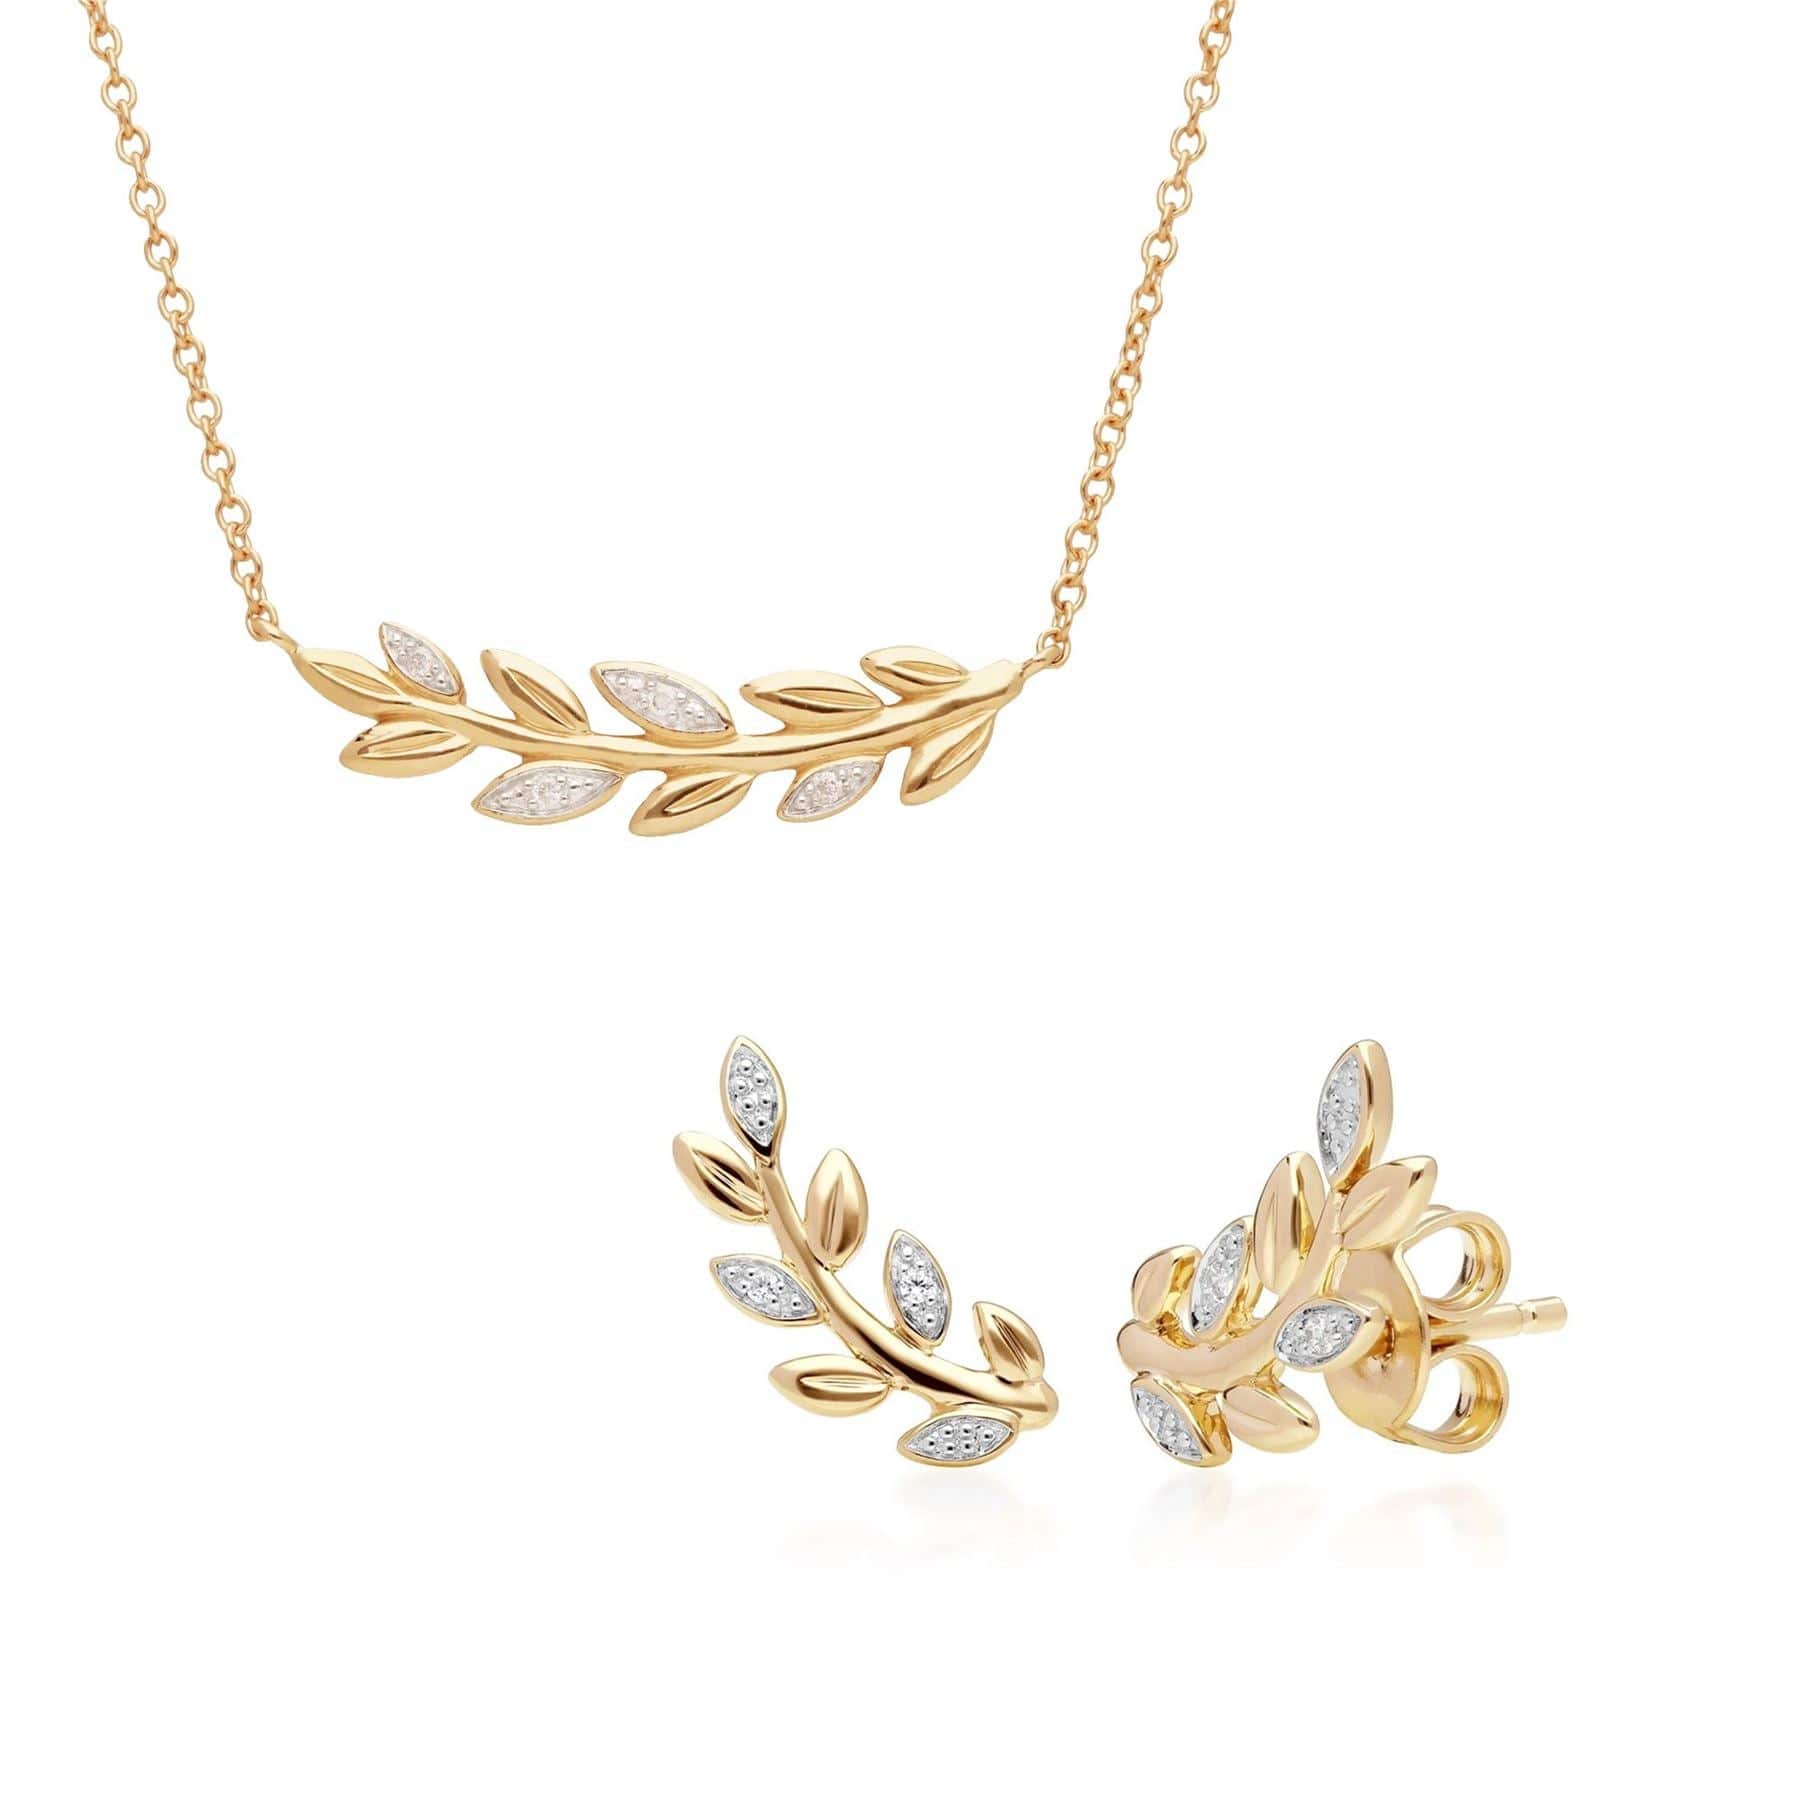 191N0235019-191E0403019 O Leaf Diamond Necklace and Stud Earring Set in 9ct Yellow Gold 1